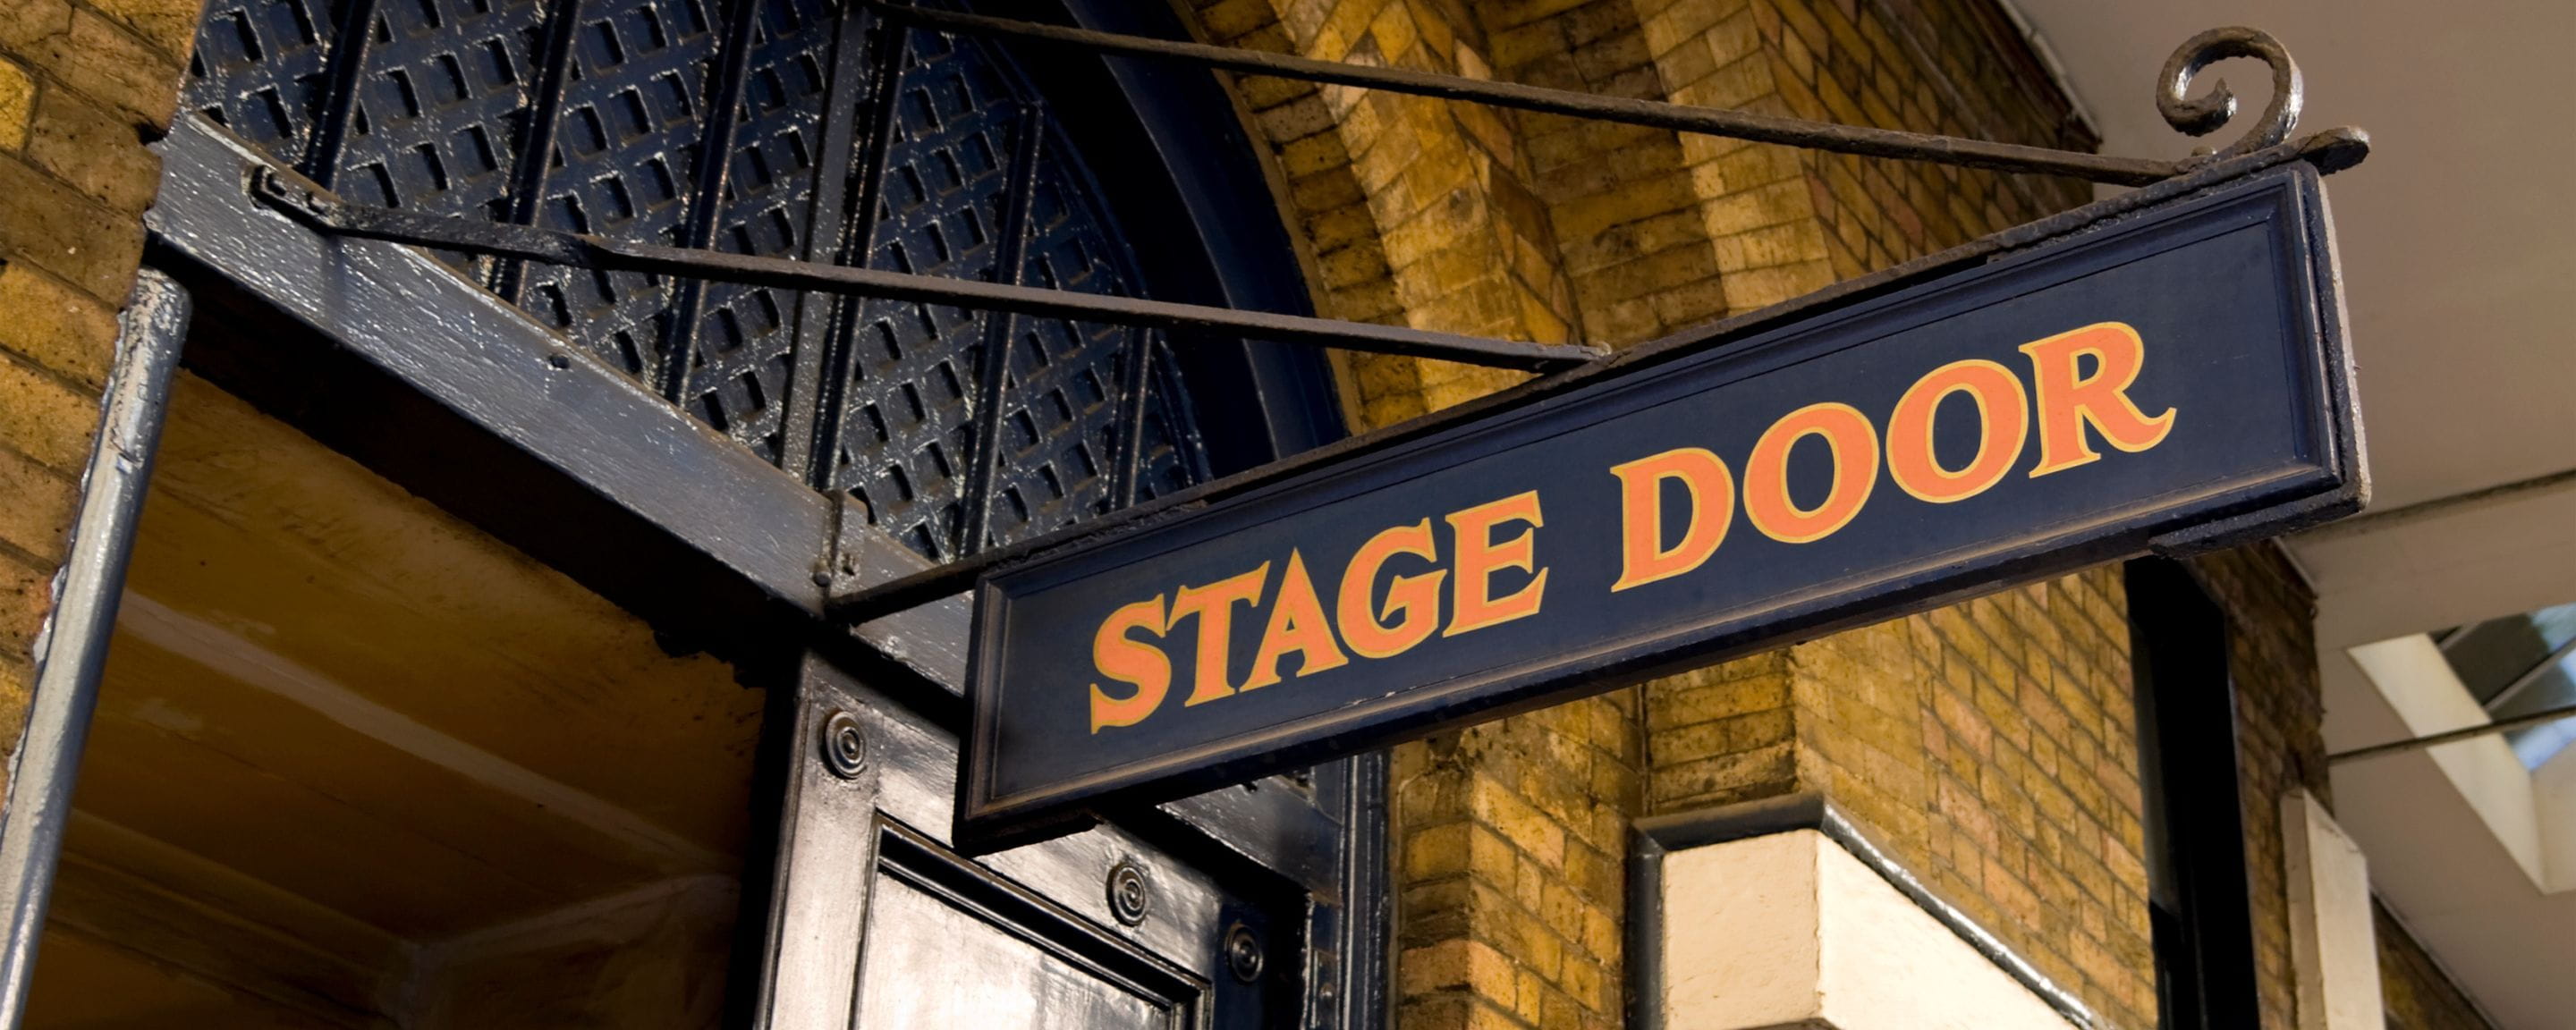 a stage door sign hanging from a theatre building